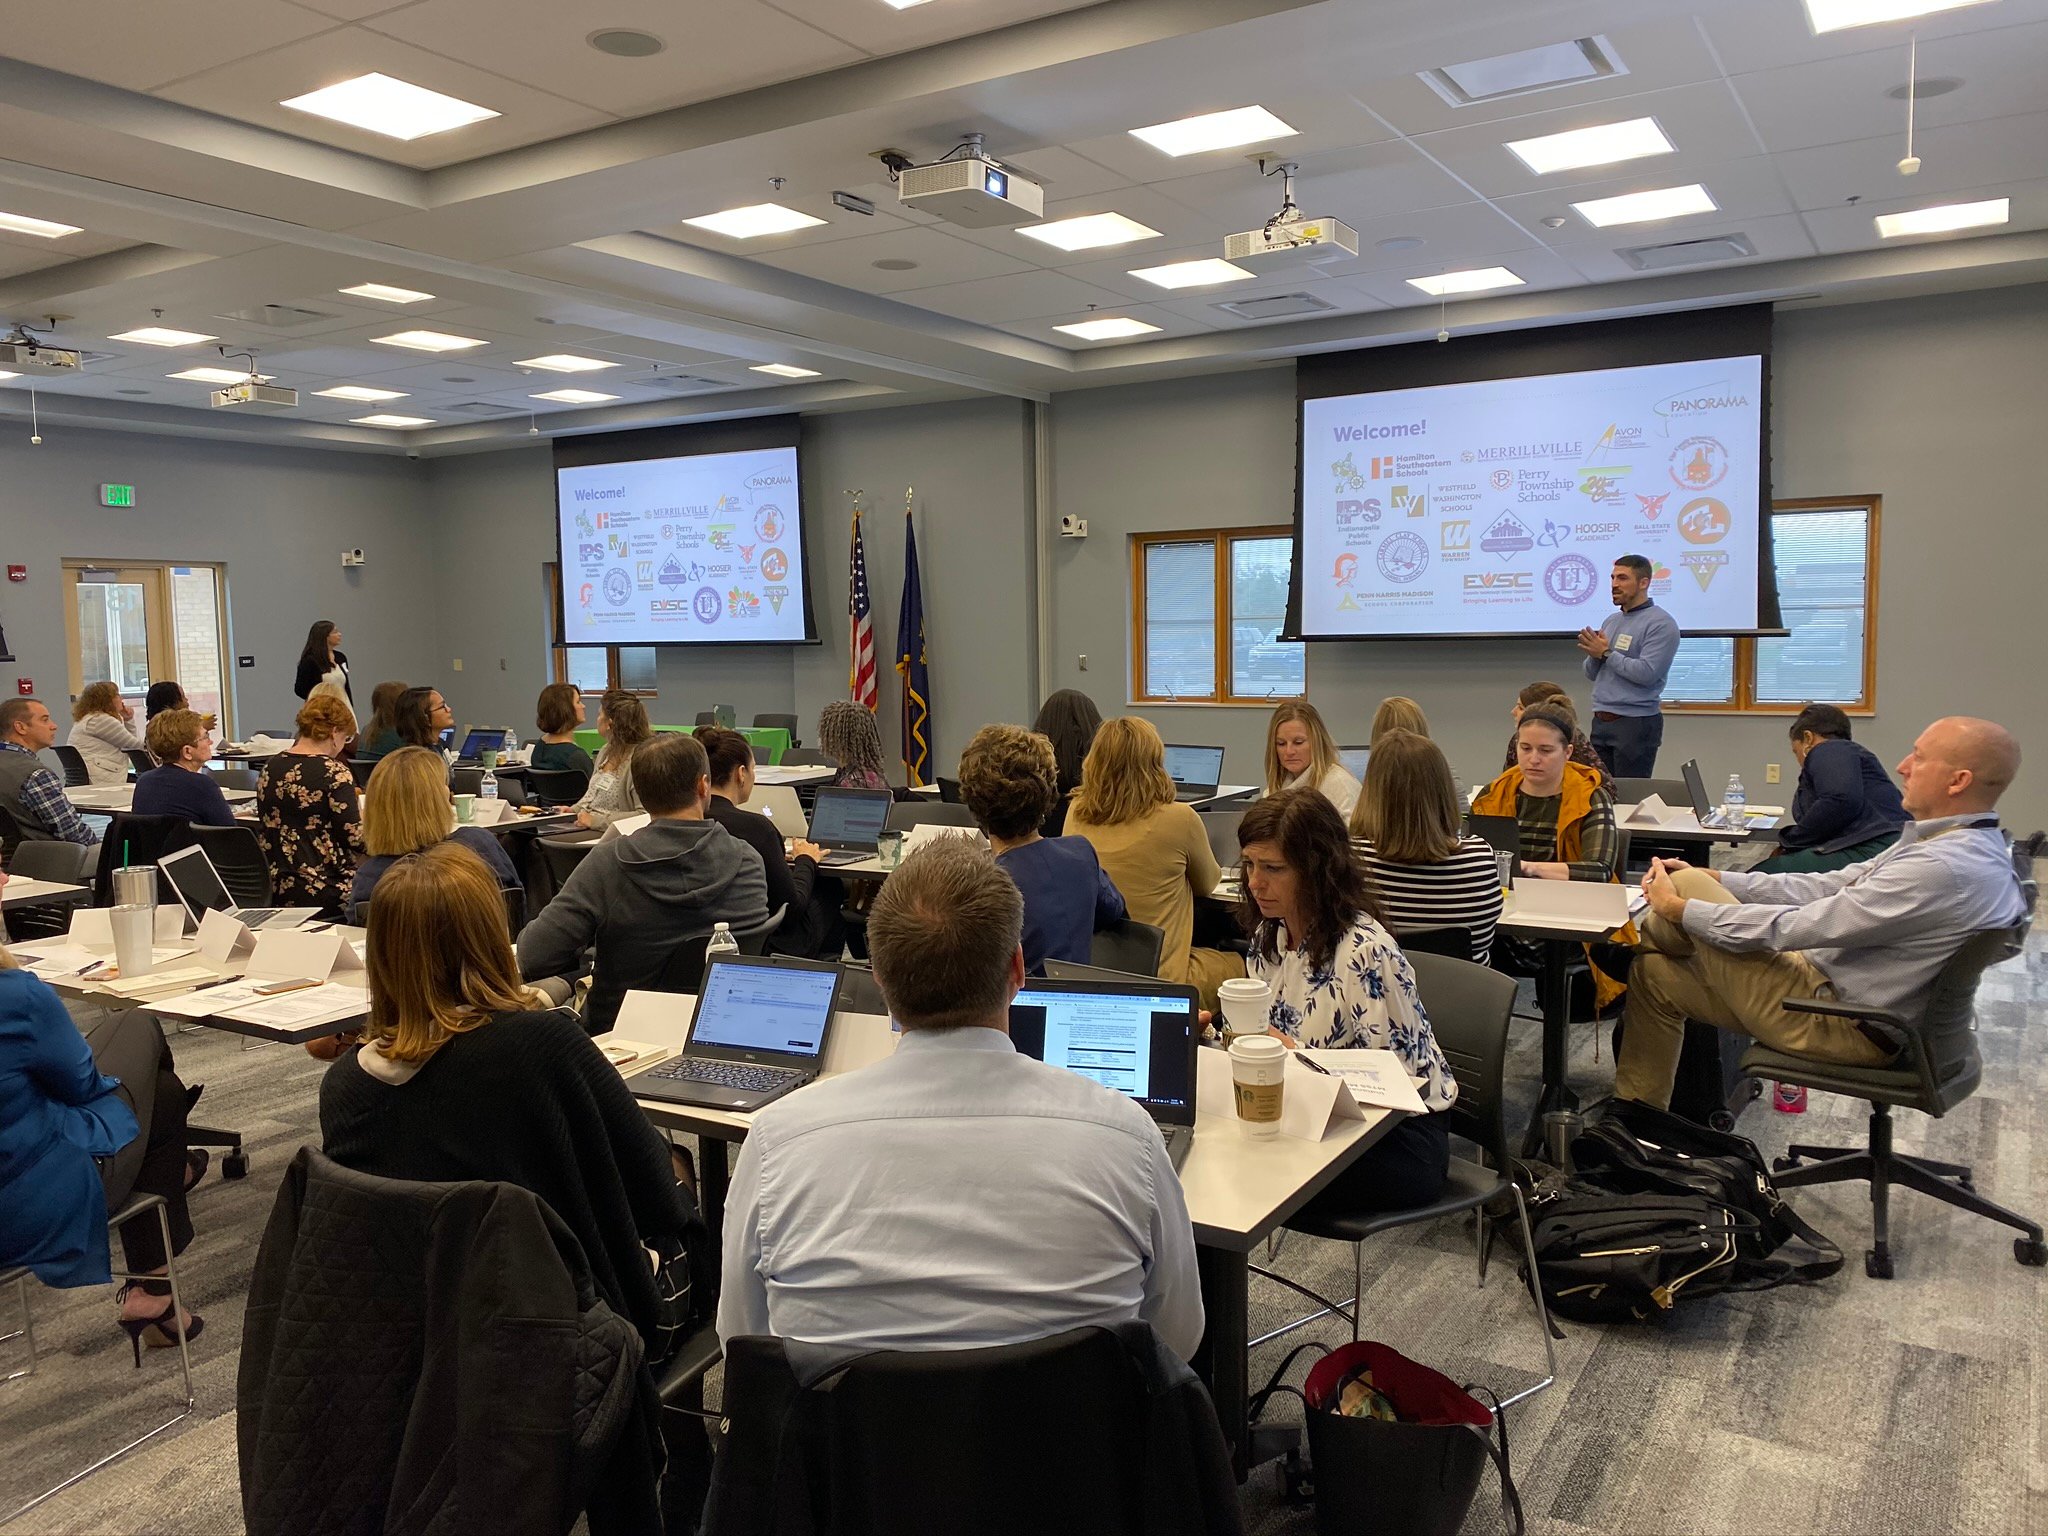 A Roundup of What We Learned at our Indianapolis MTSS Meetup